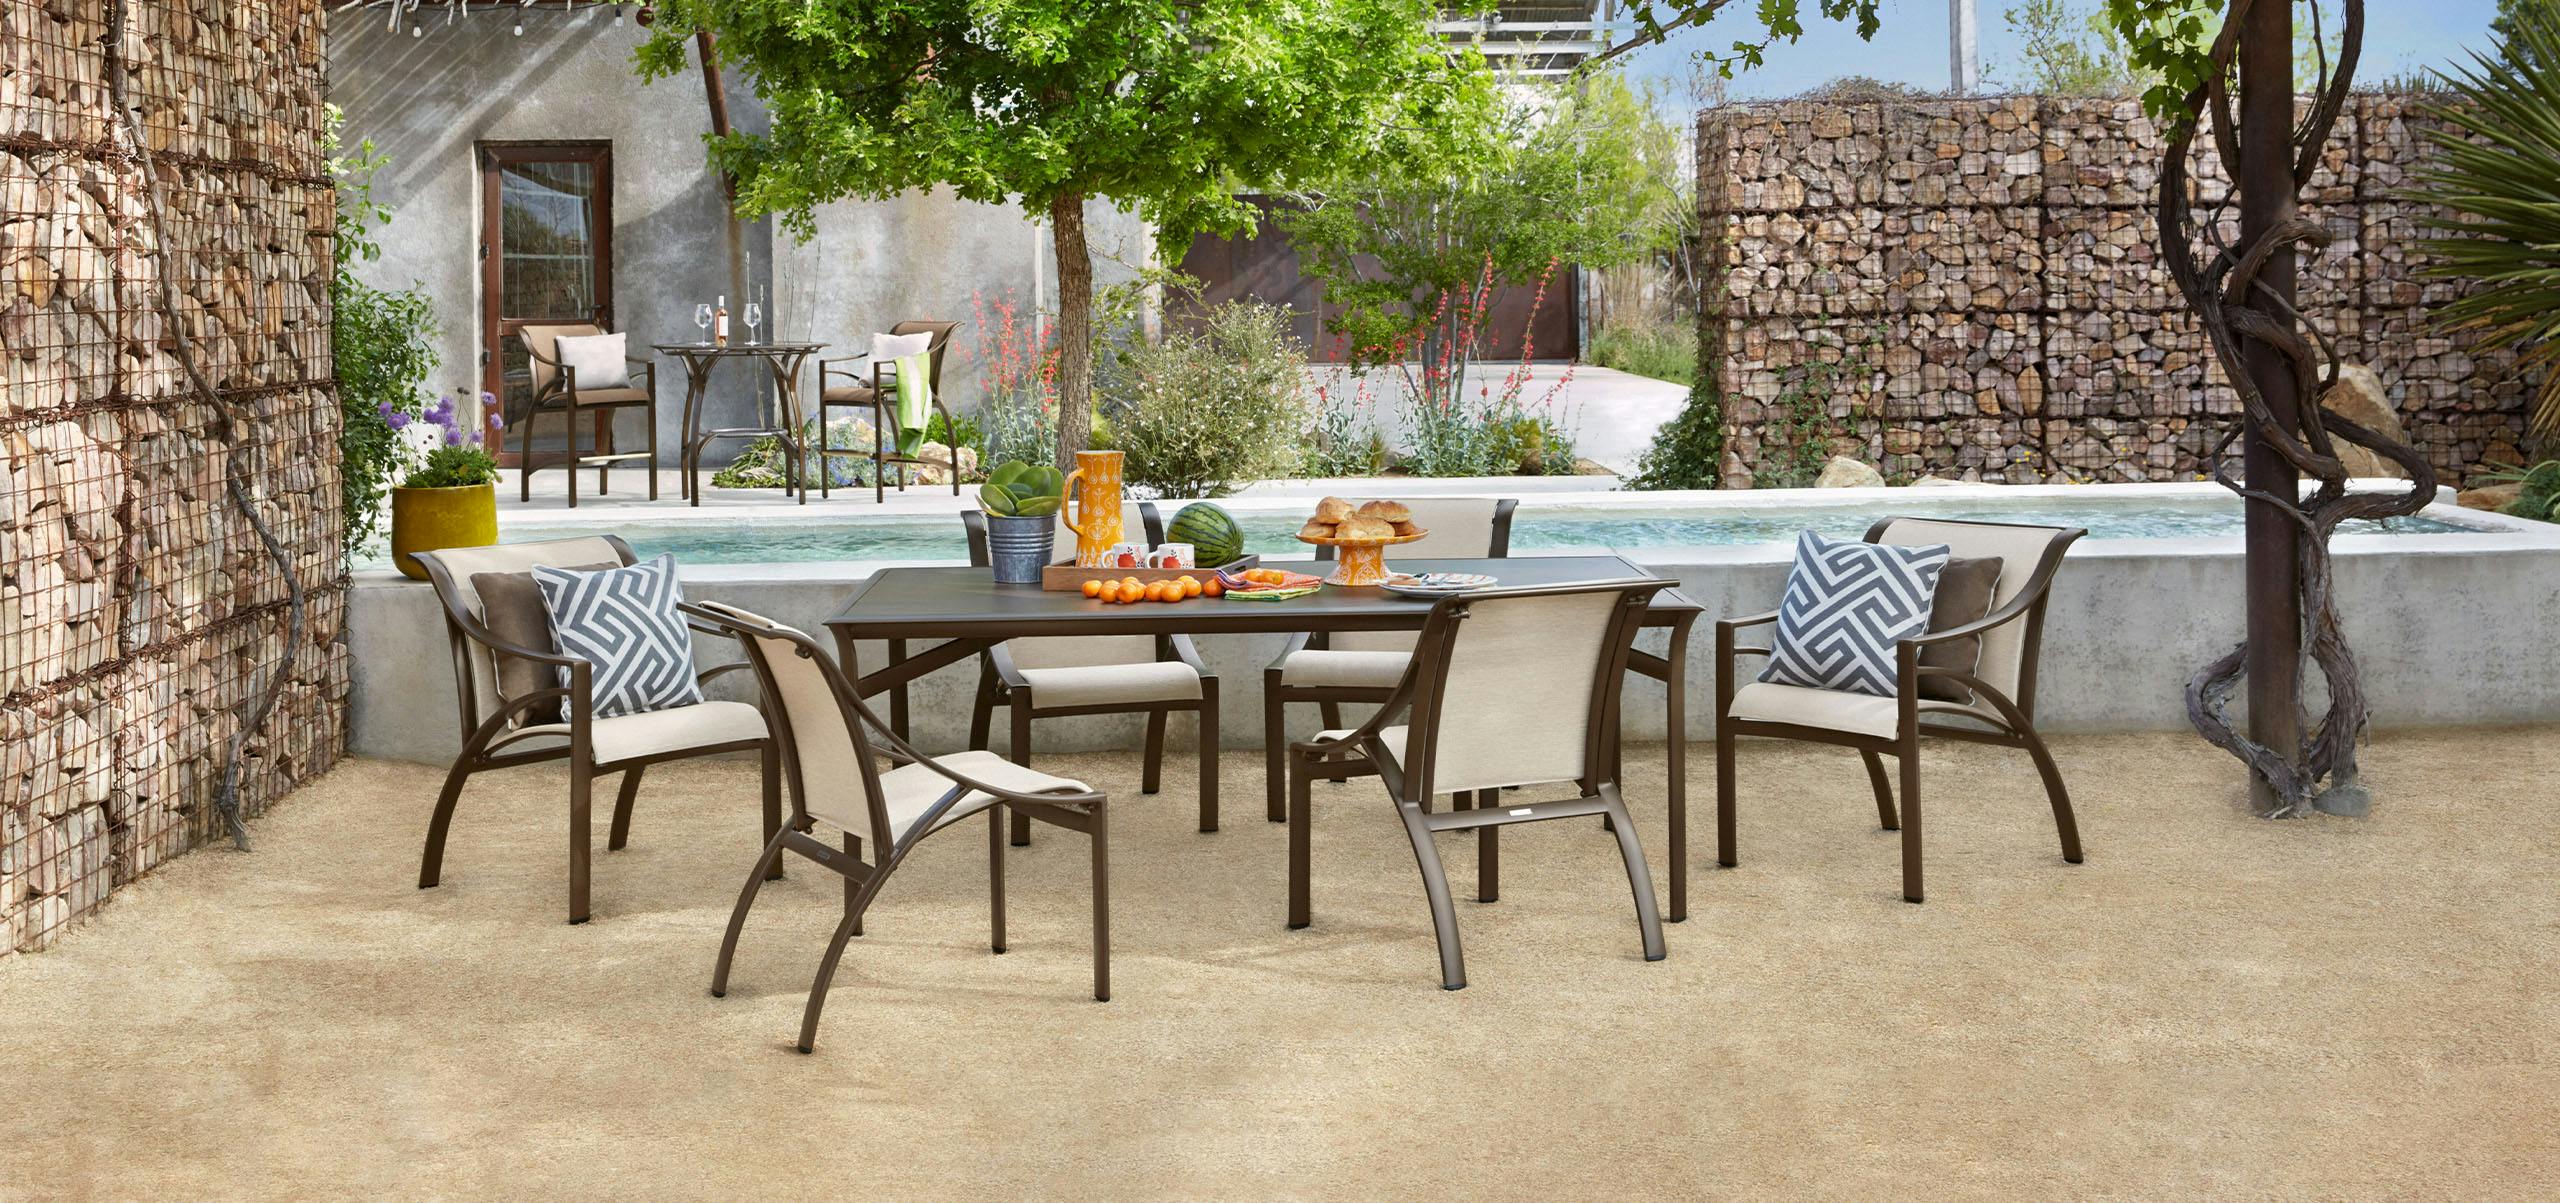  Decorating Tips for Patios 